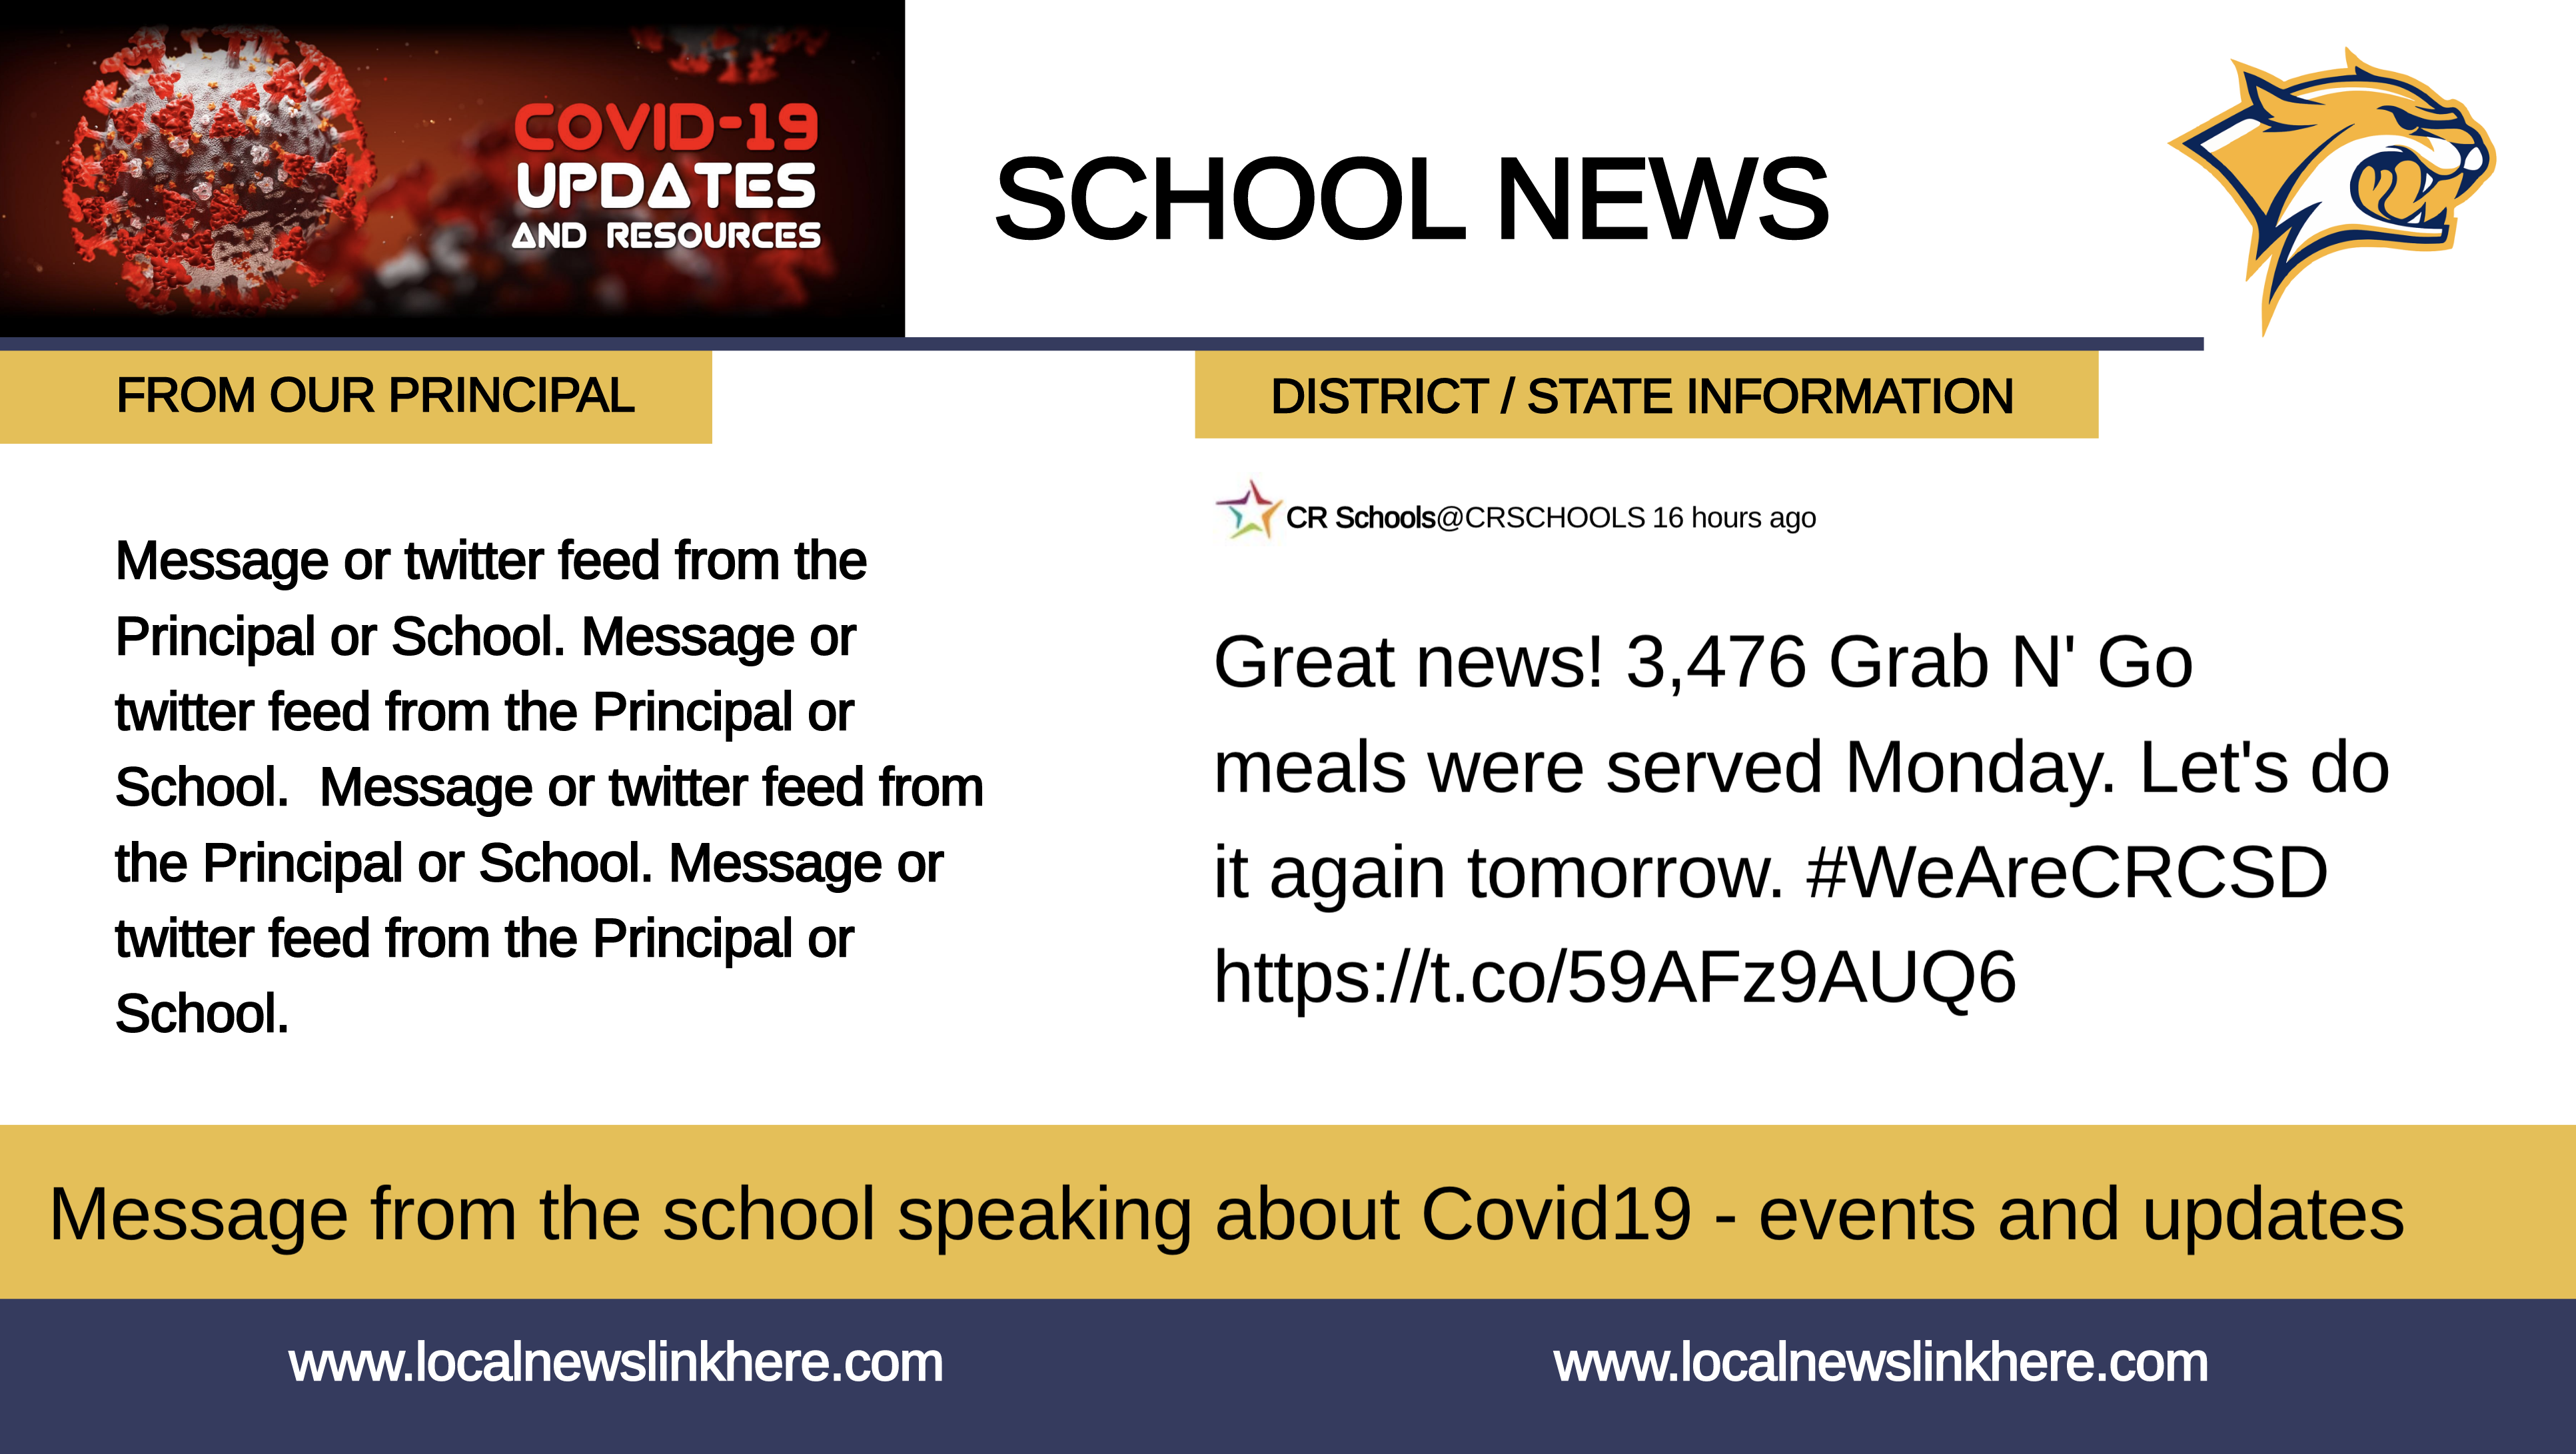 School News COVID-19 Template For Digital Signage